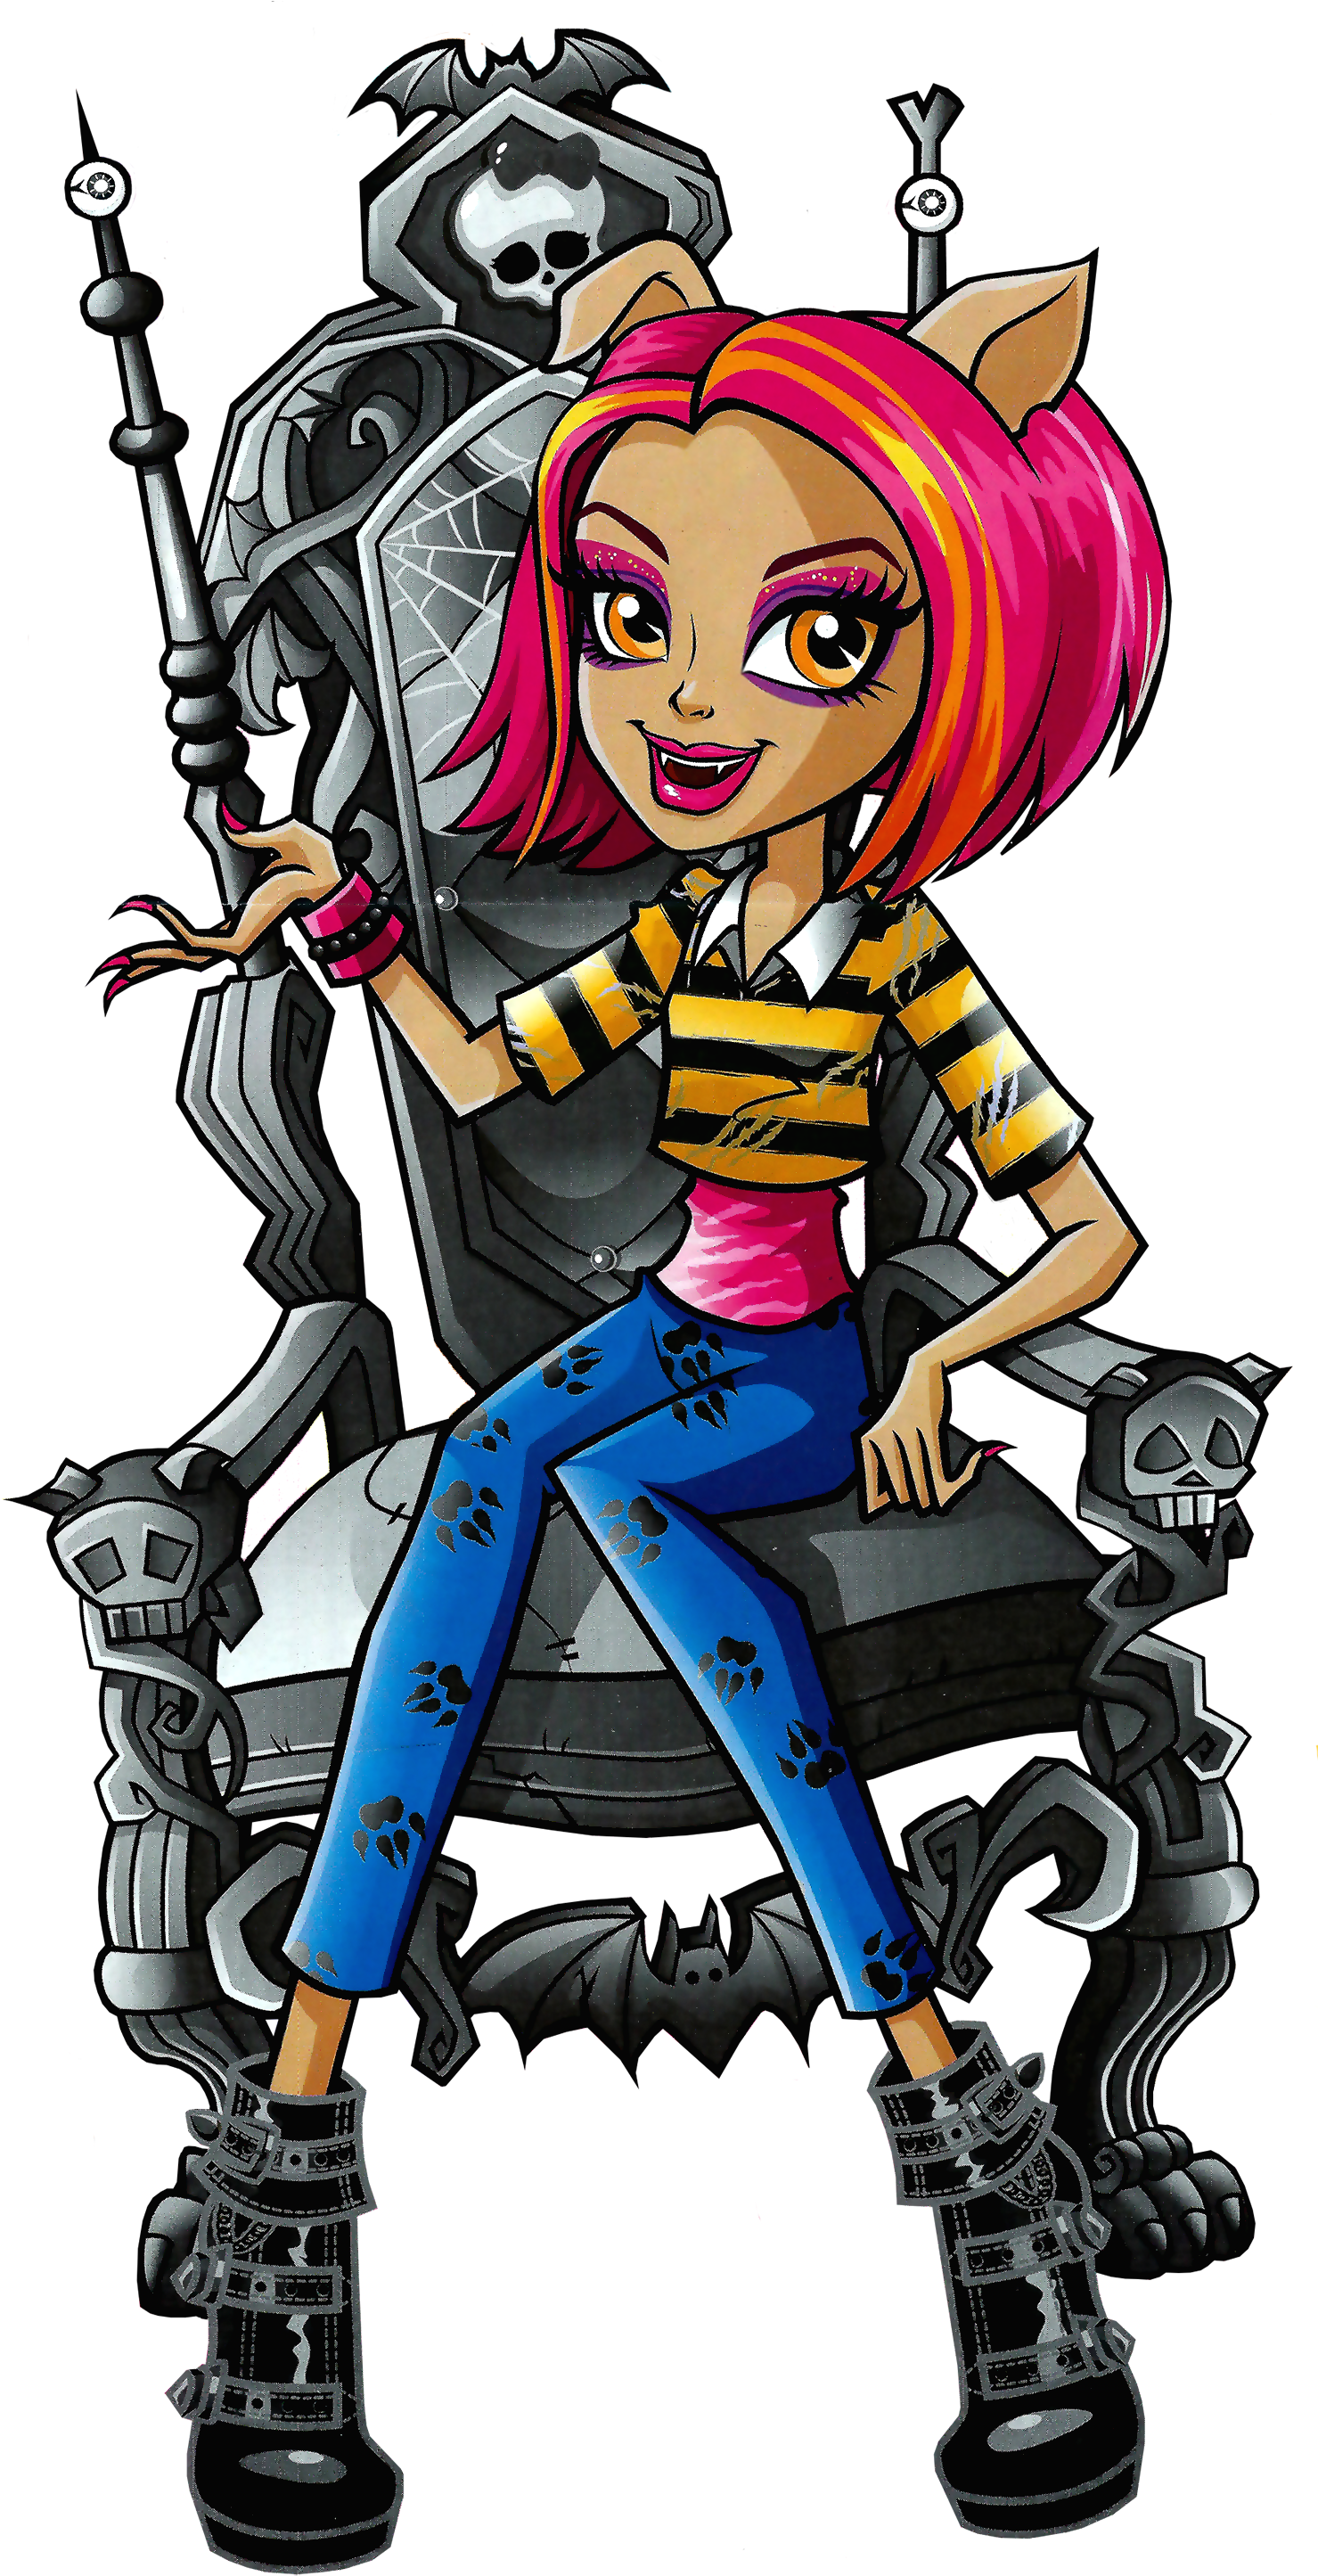 A Pack Of Trouble - Howleen From Monster High (1500x2913)